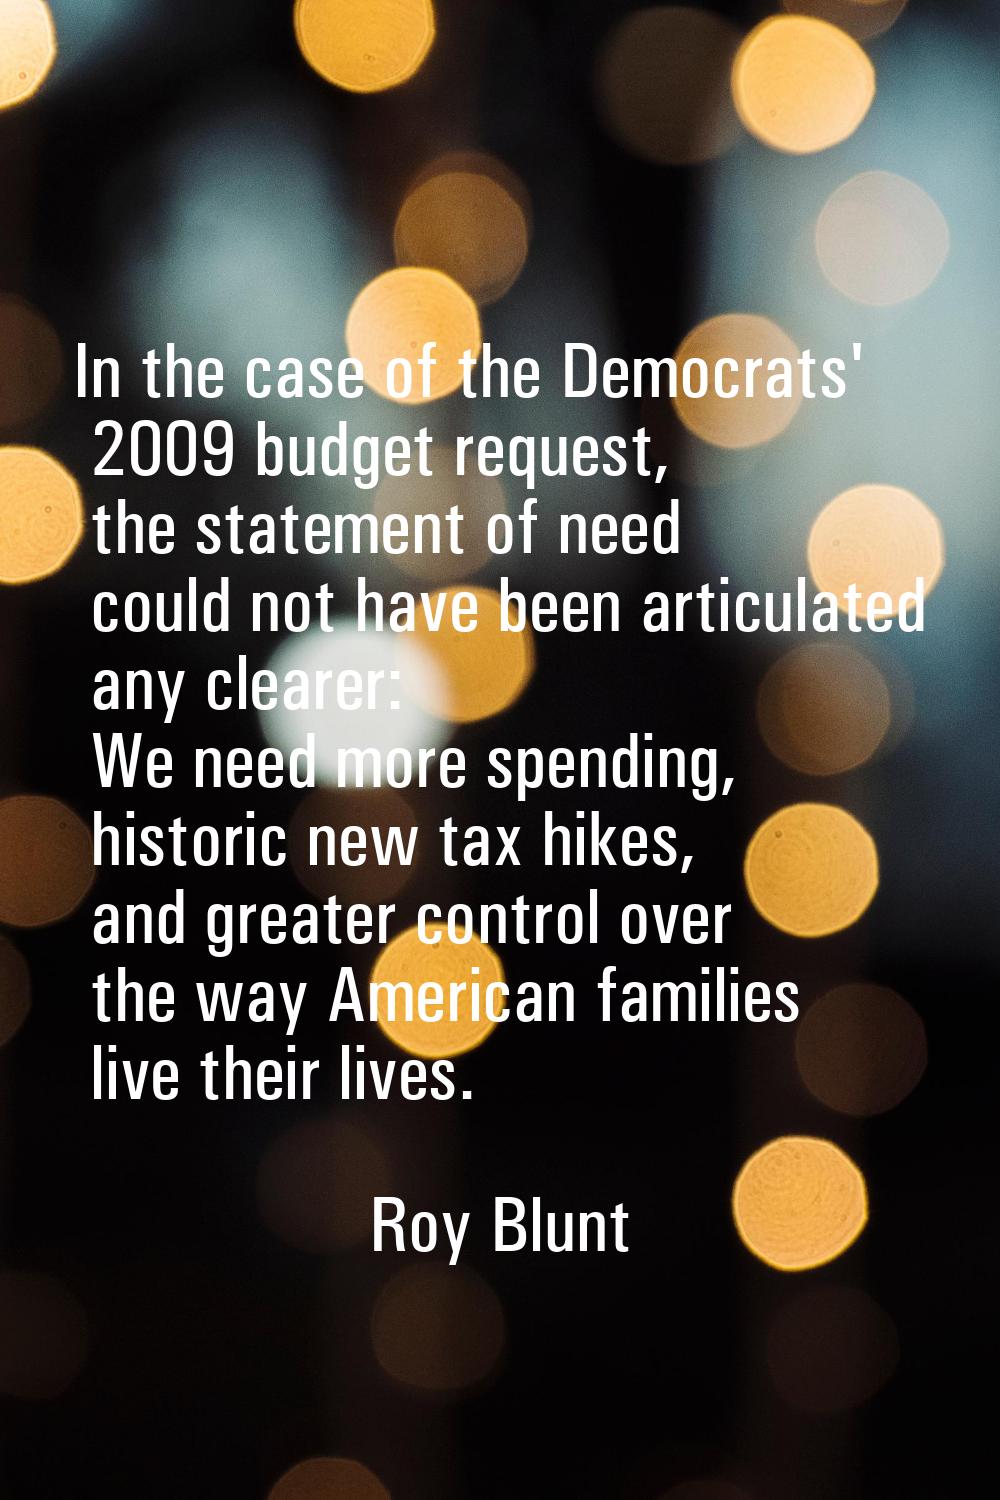 In the case of the Democrats' 2009 budget request, the statement of need could not have been articu